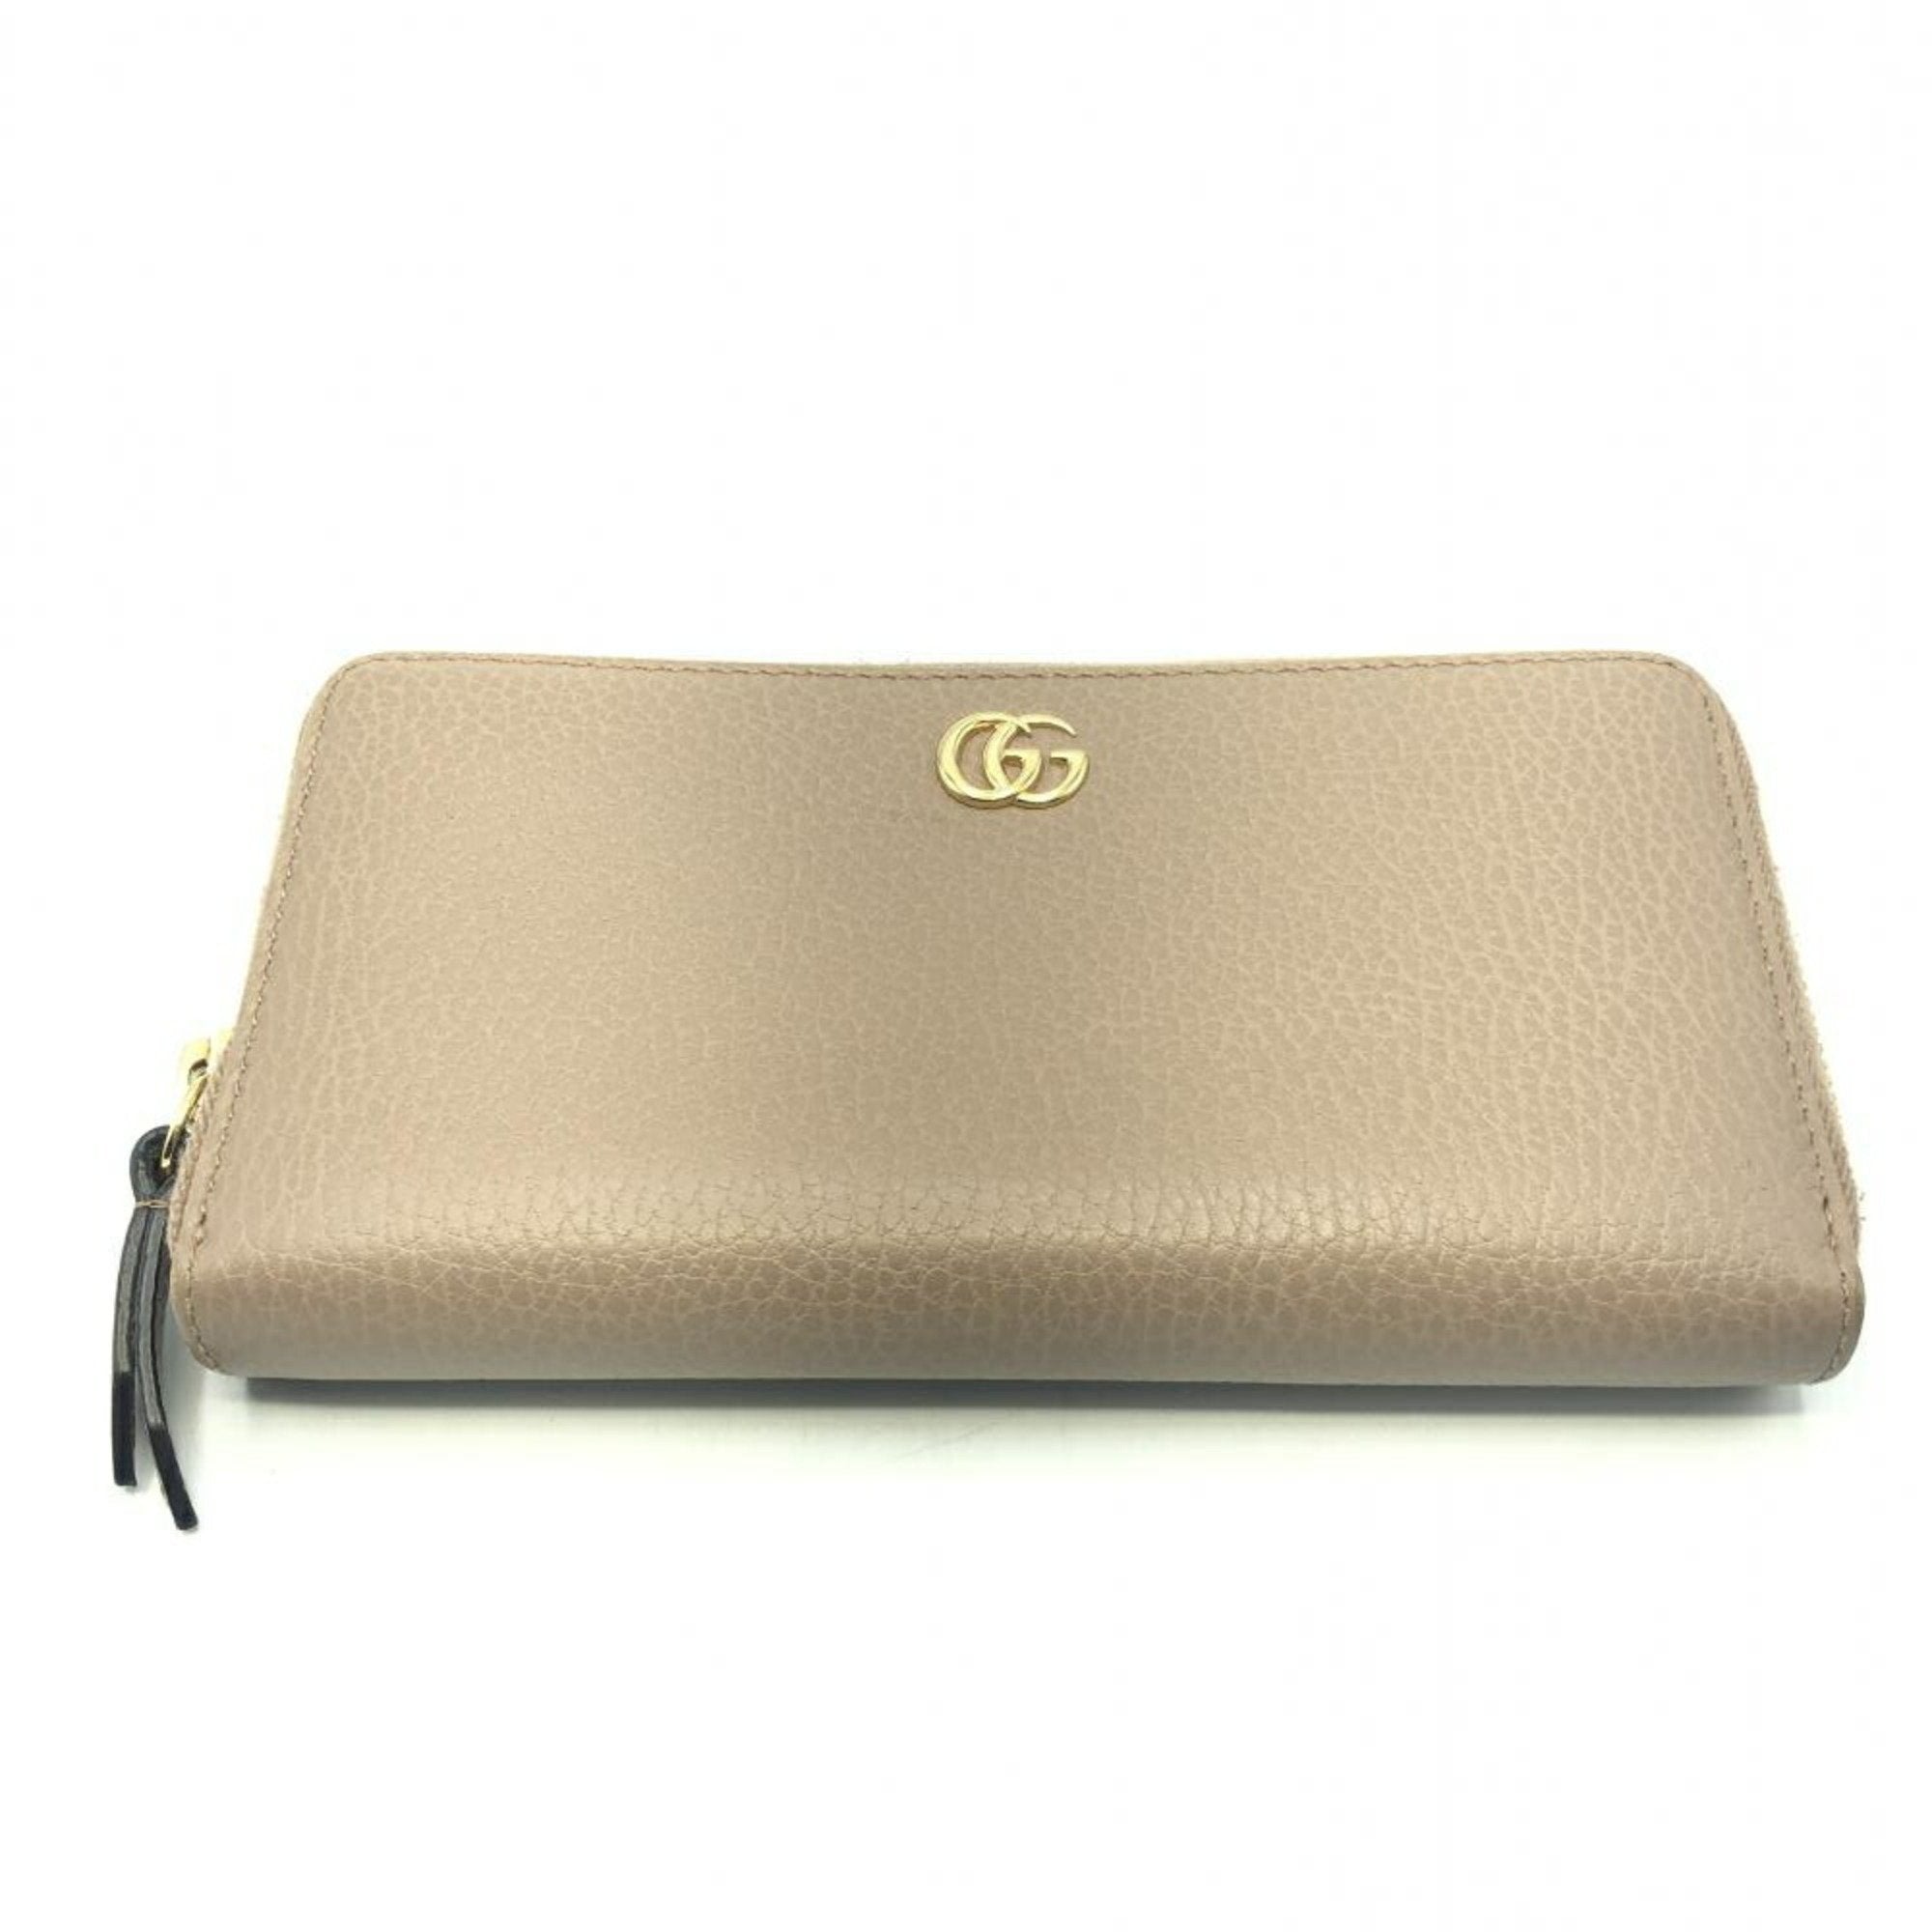 Round Long Wallet GG Marmont